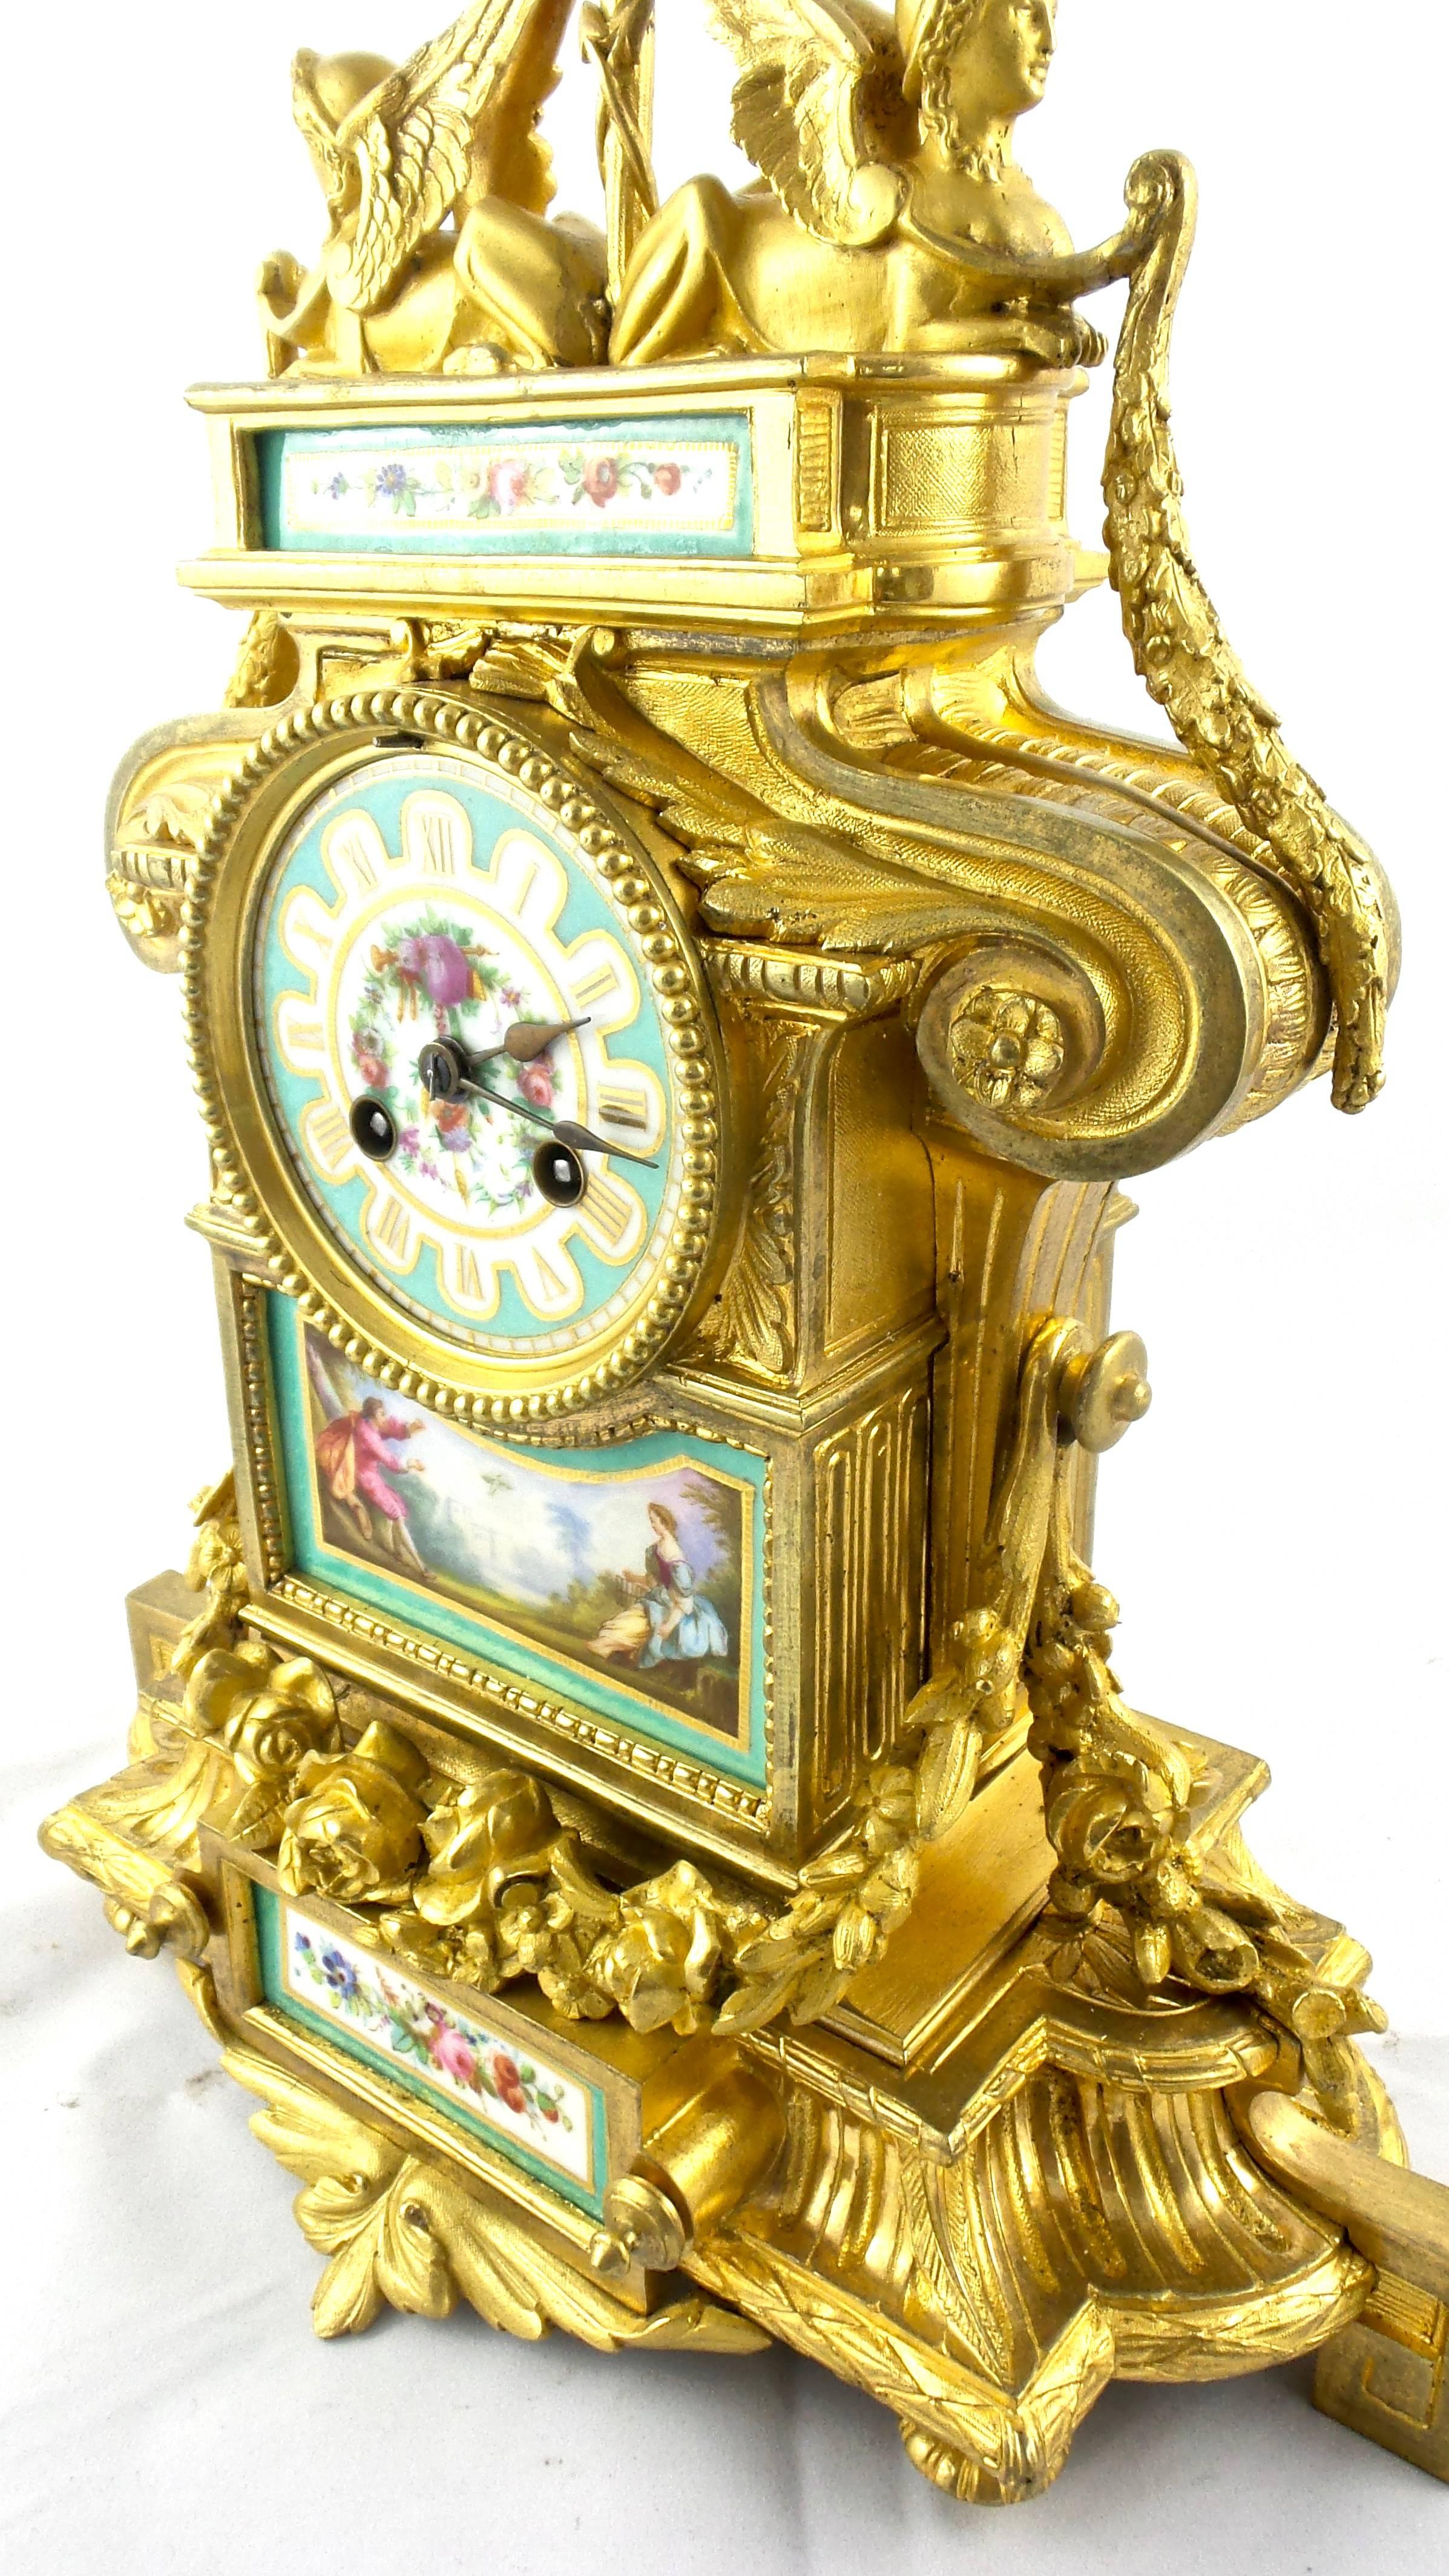 Mid-19th Century French 19th Century Gilt Ormolu Bronze and Aqua Sevres Porcelain Mantle Clock For Sale